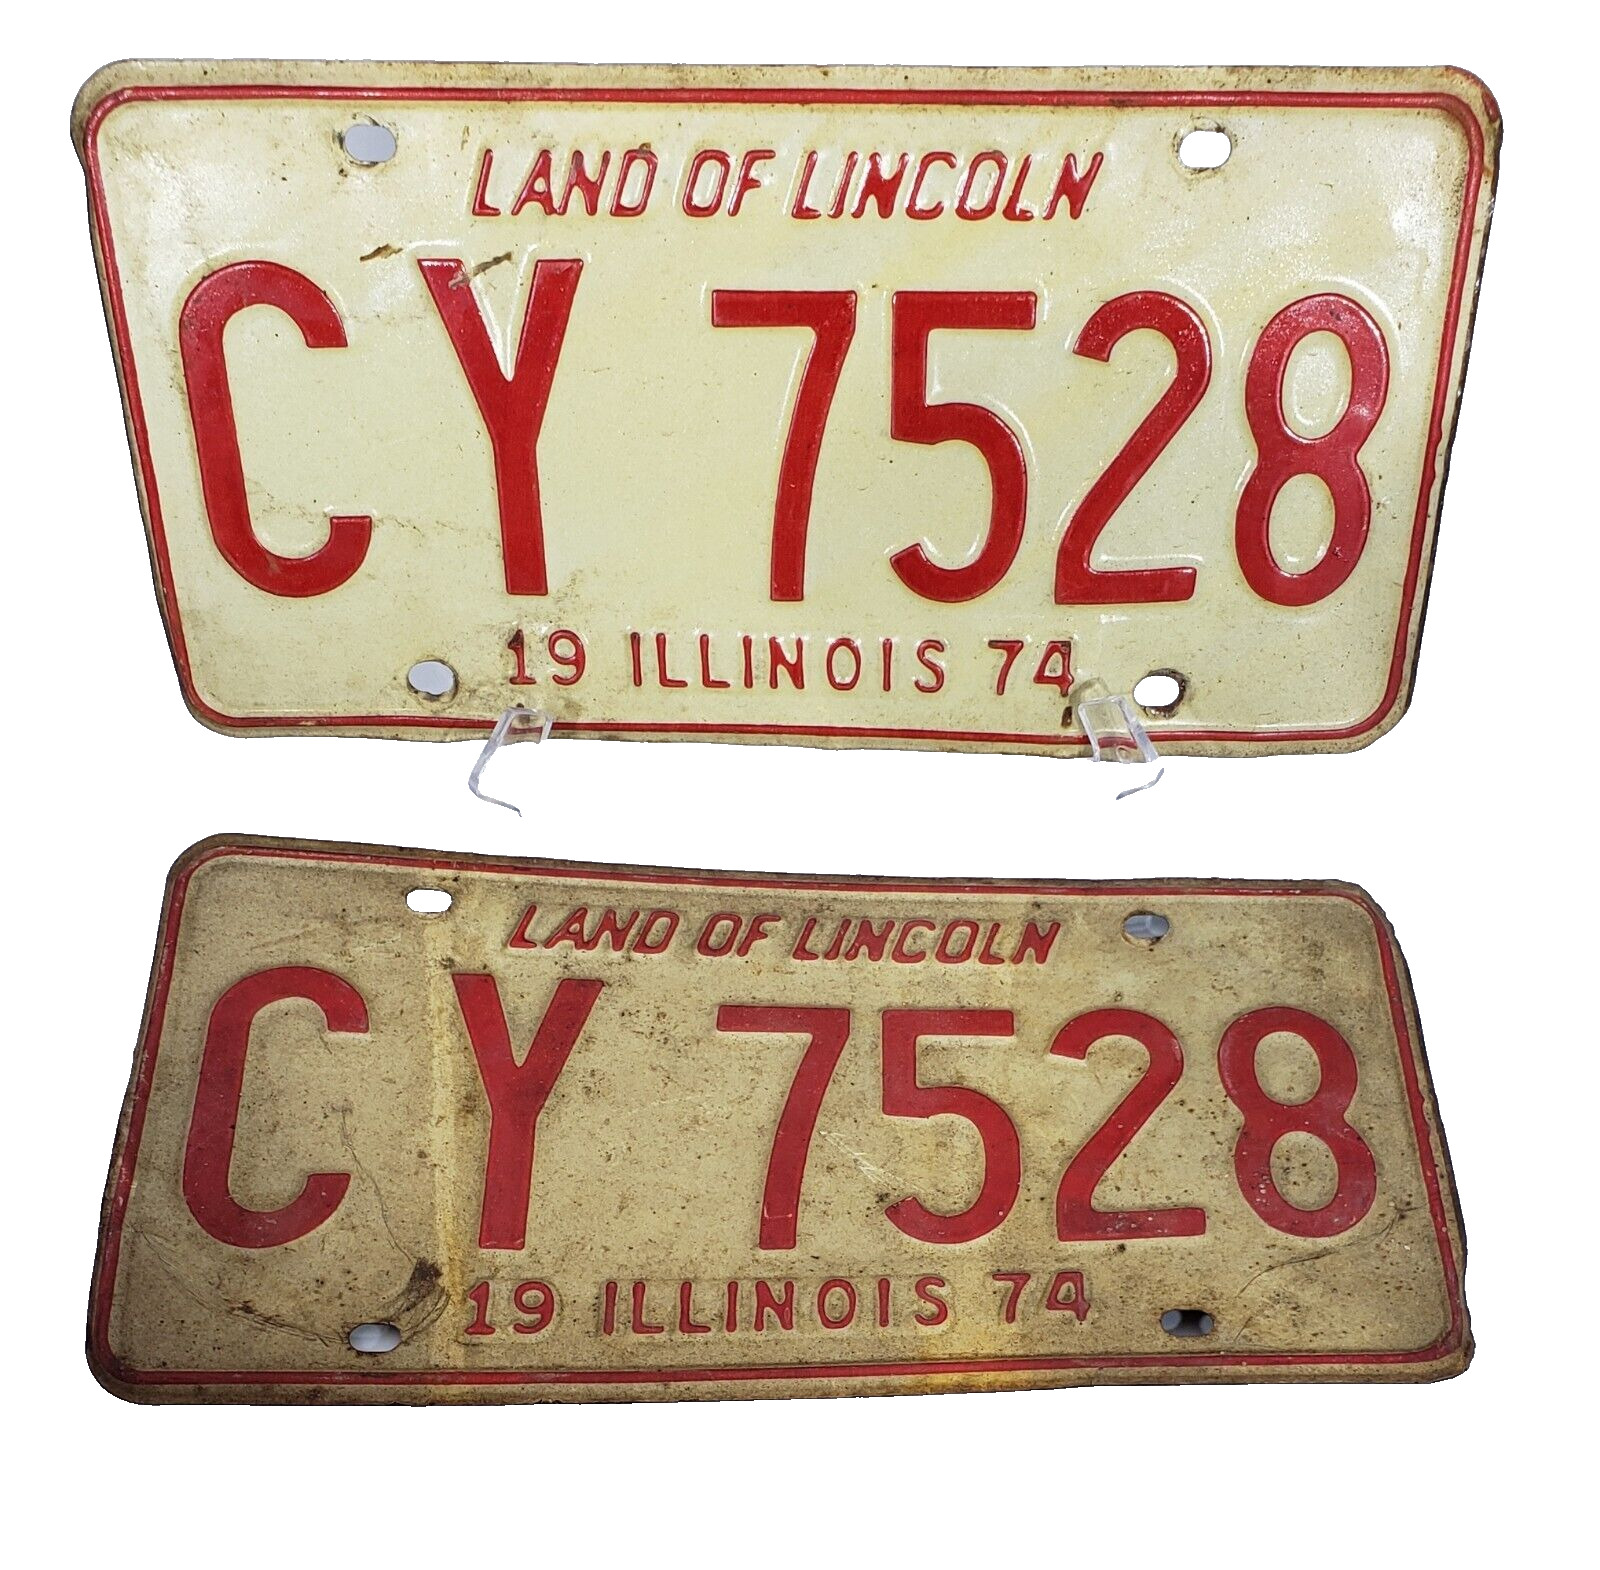 Vintage Illinois 1974 License Plates Matching Pair CY 7528 Man Cave Expired